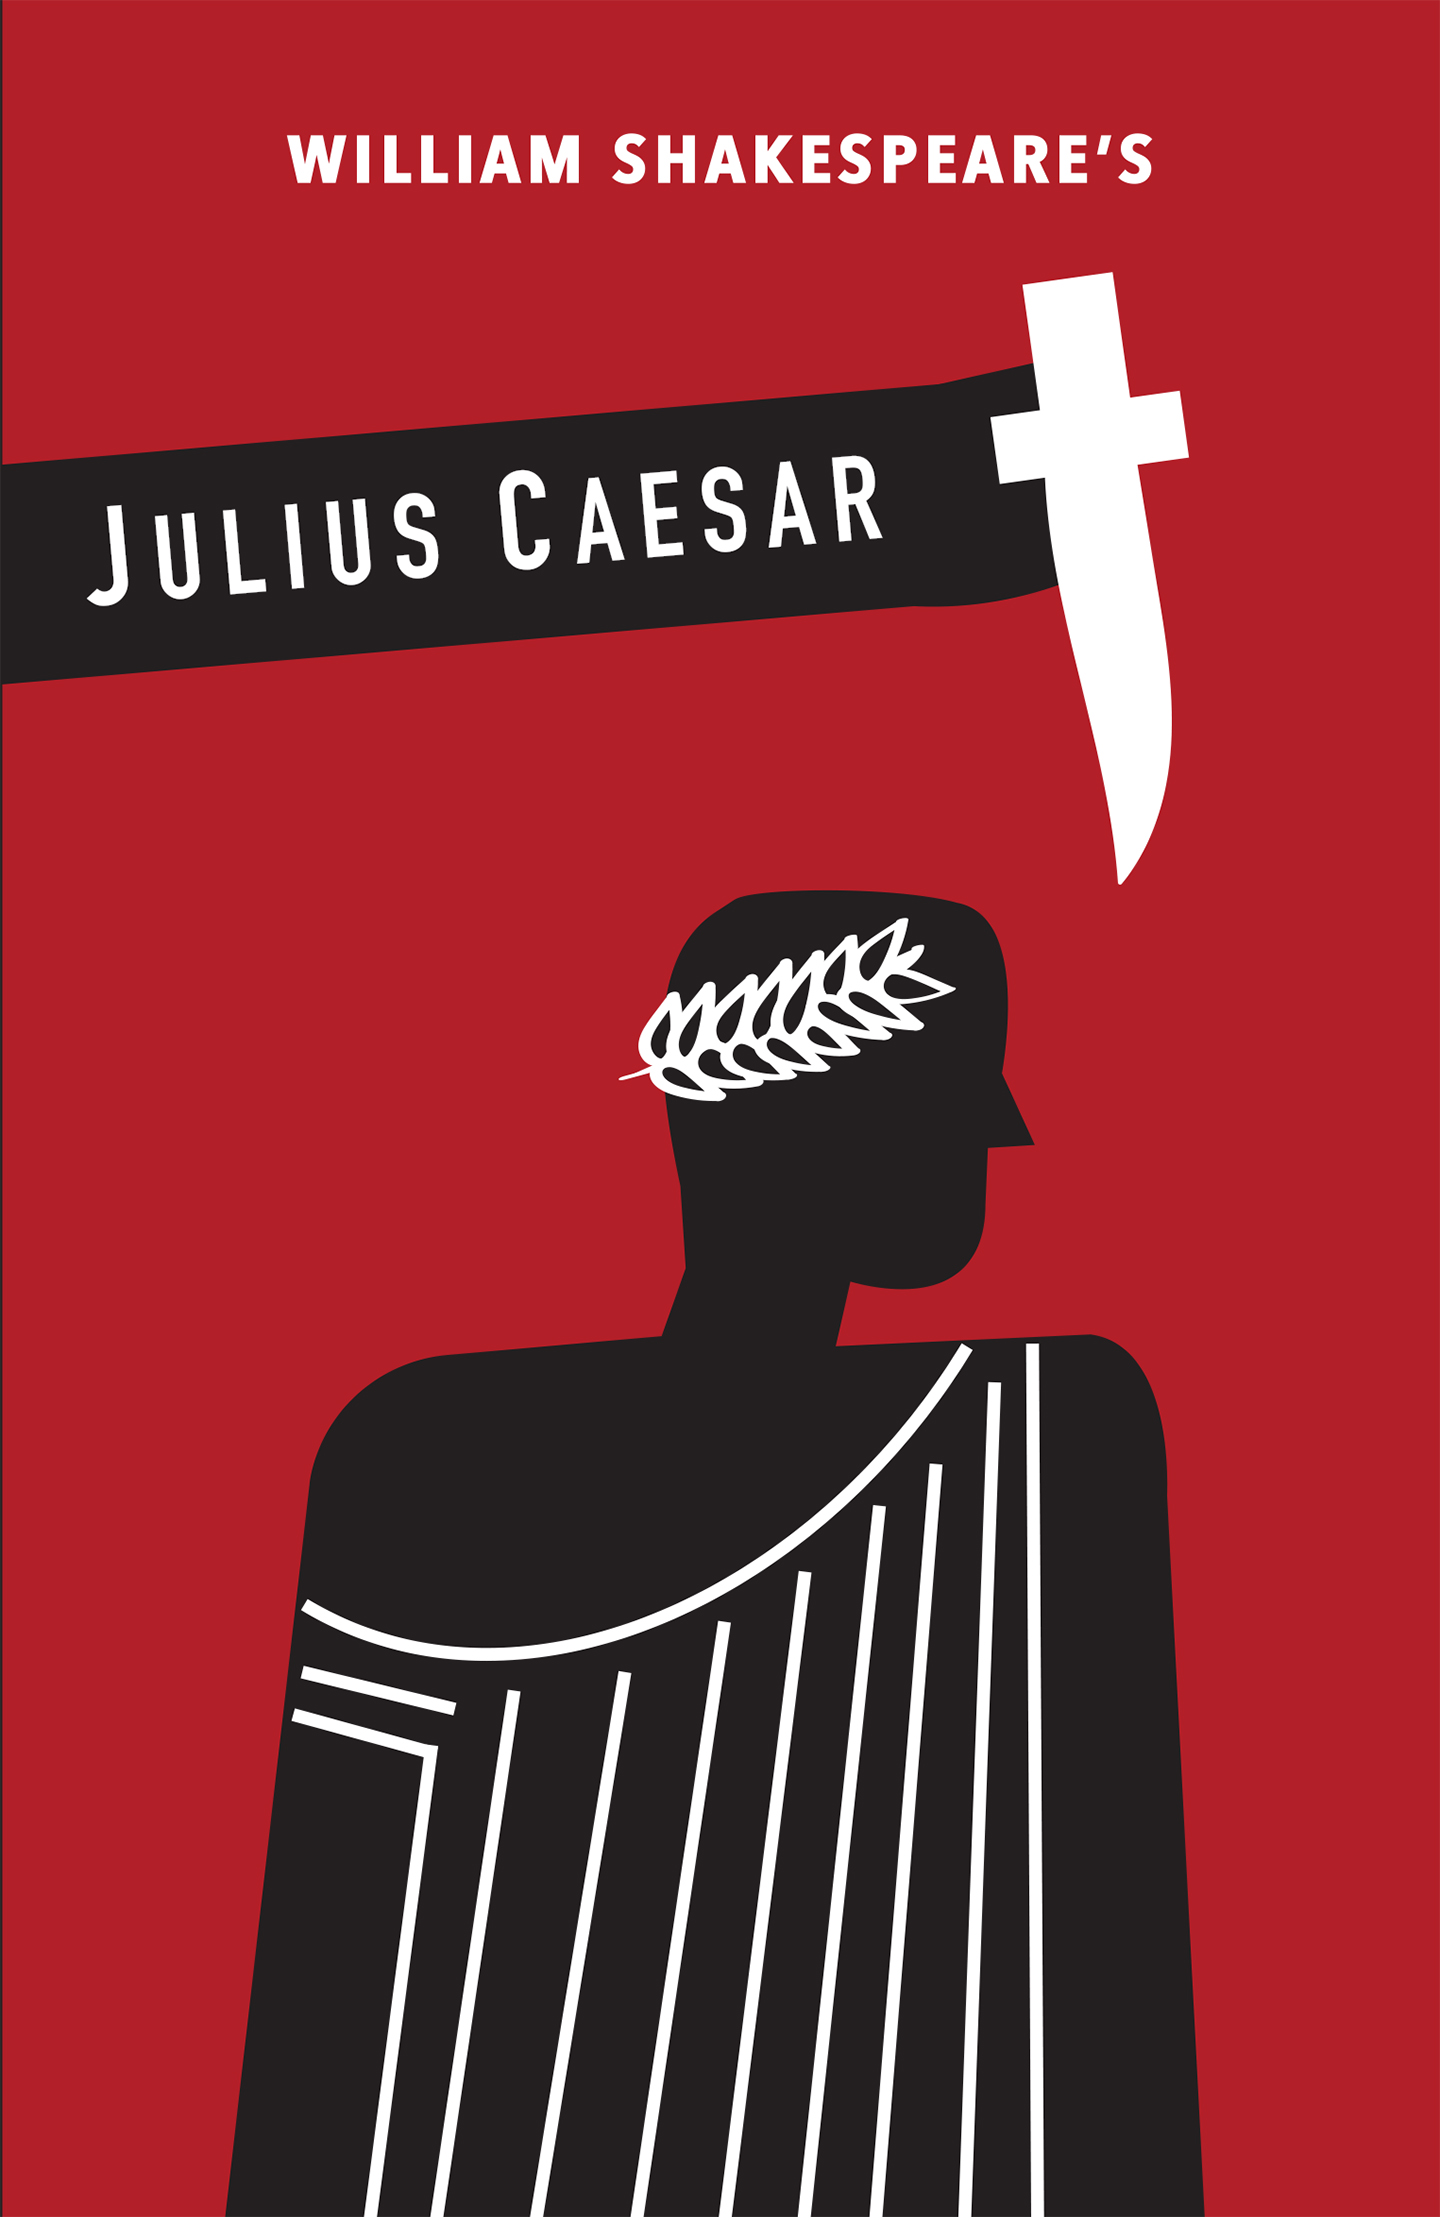 Silhouette of Julius Caesar with dagger above on front cover